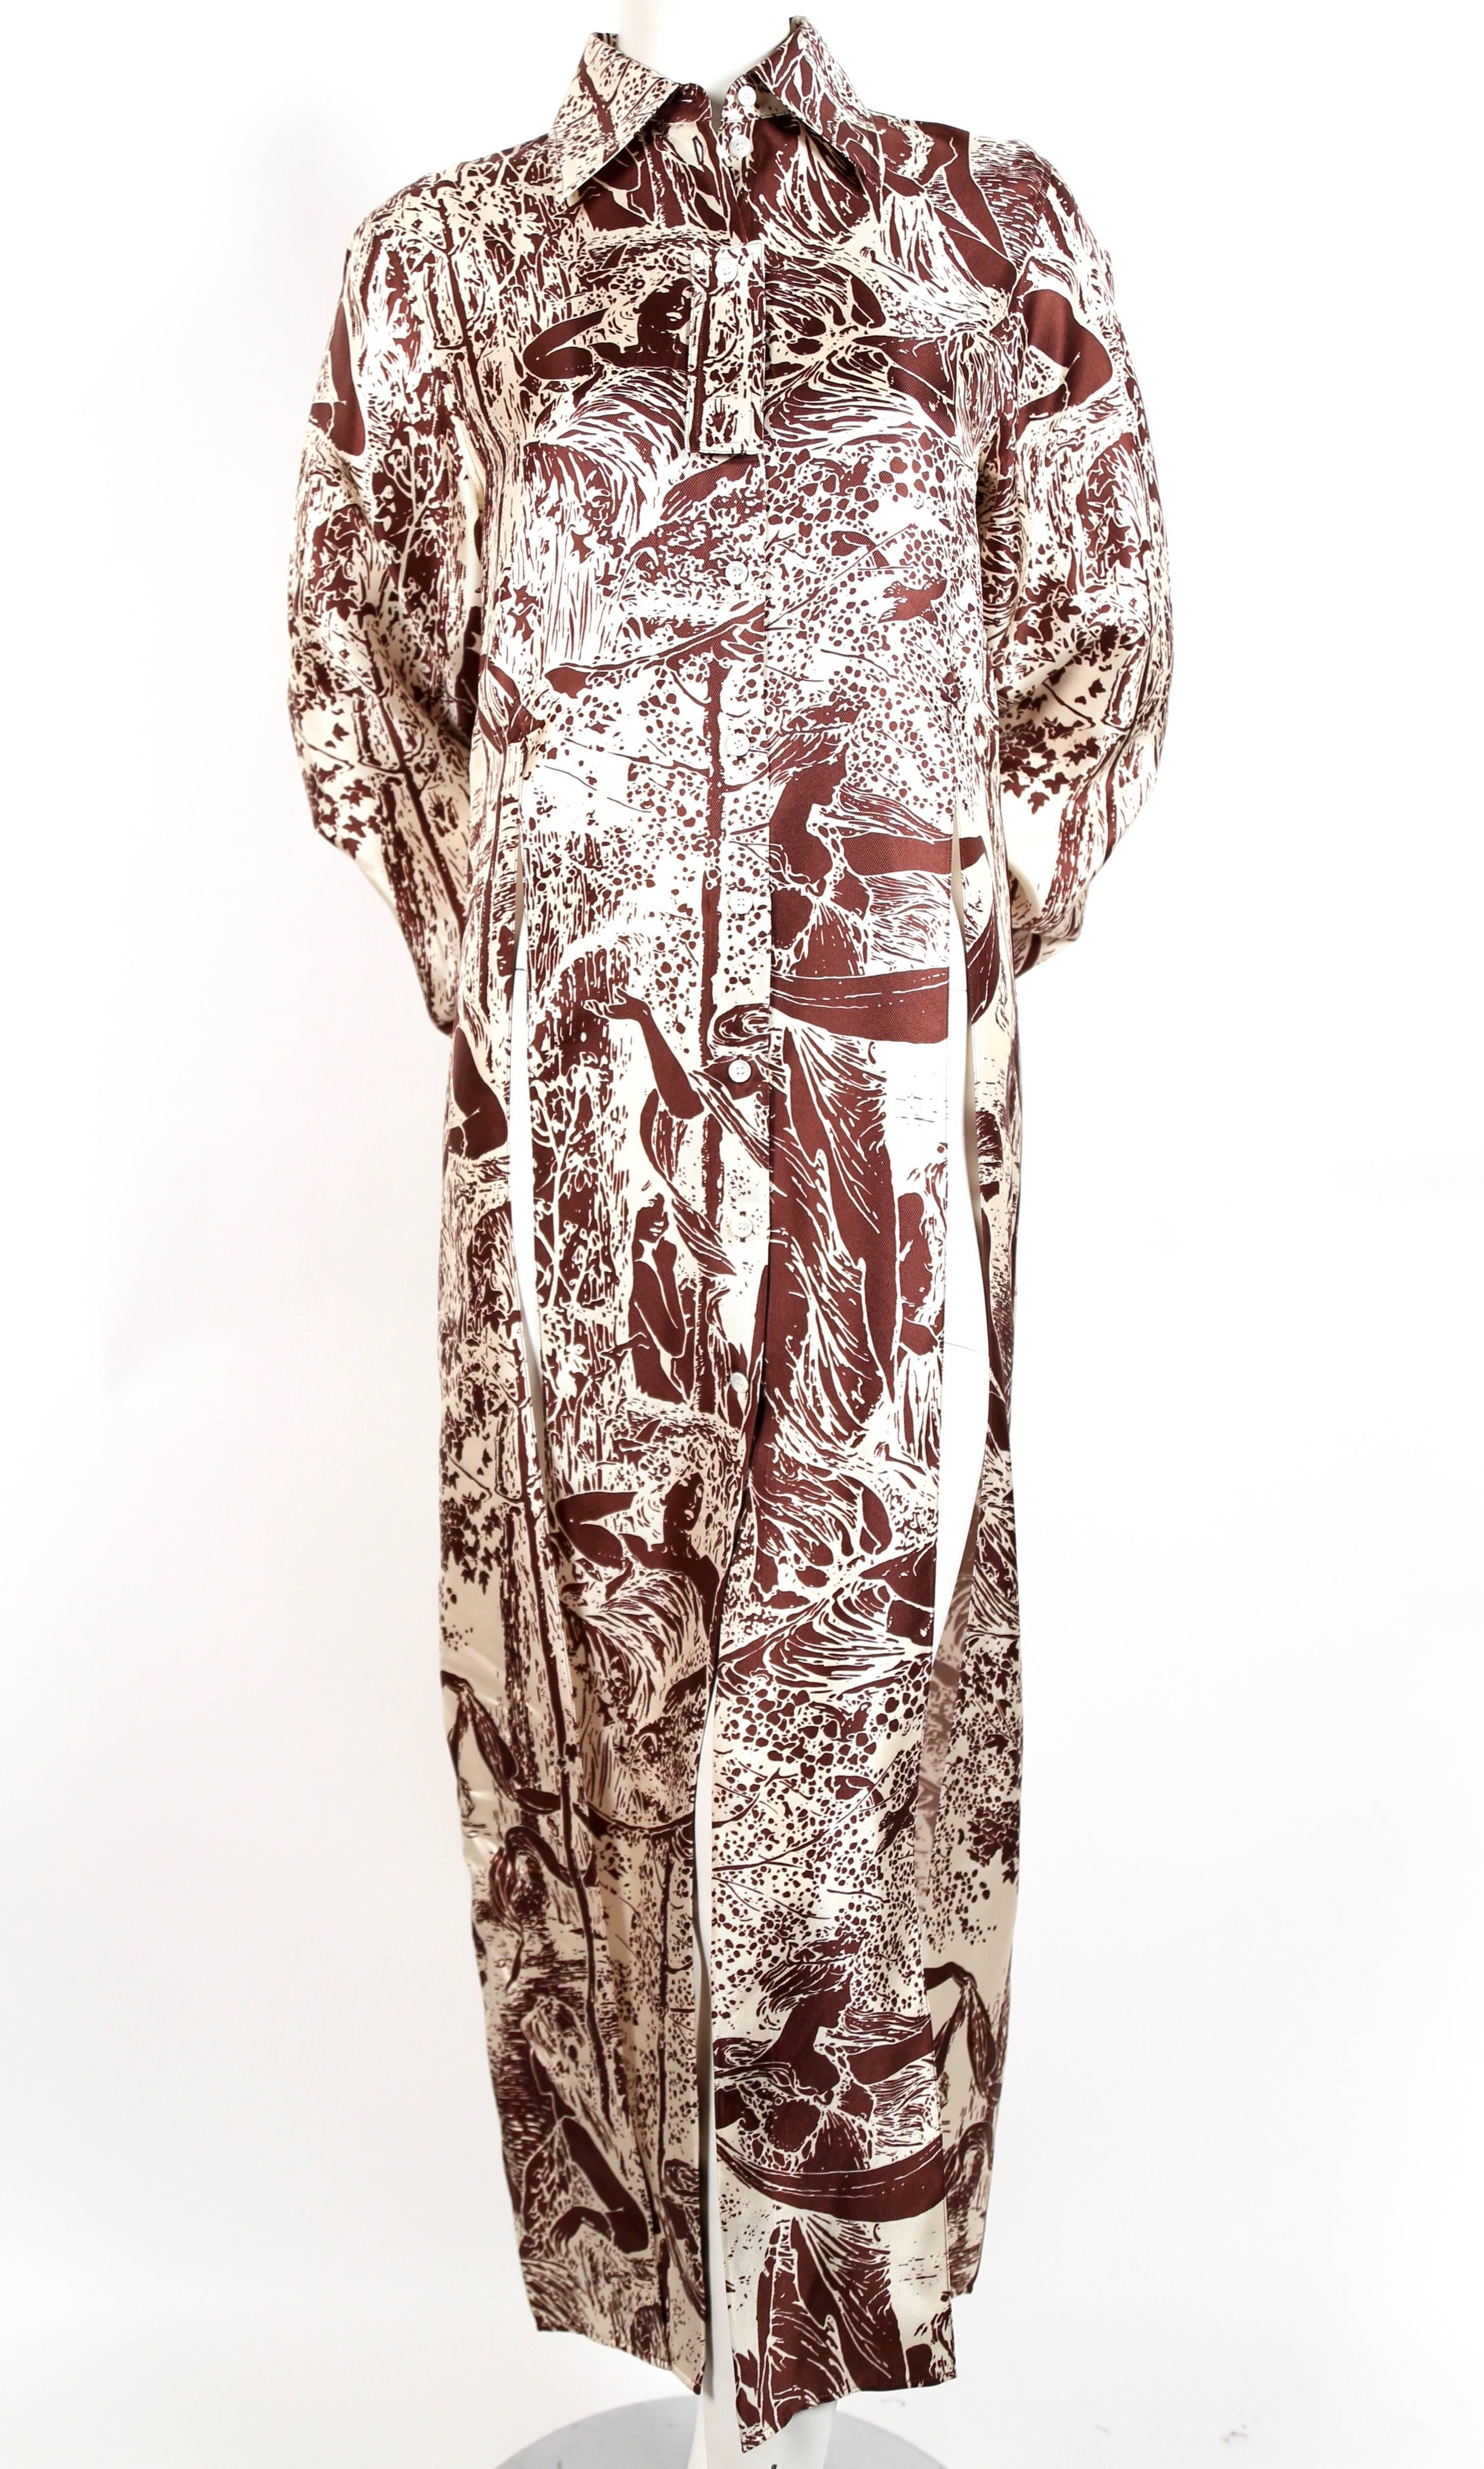 Brown and off-white printed silk dress with large slits at front sides and back designed by Phoebe Philo for Celine exactly as seen on the fall 2017/2018 runway. French size 38. Approximate measurements: shoulder 16